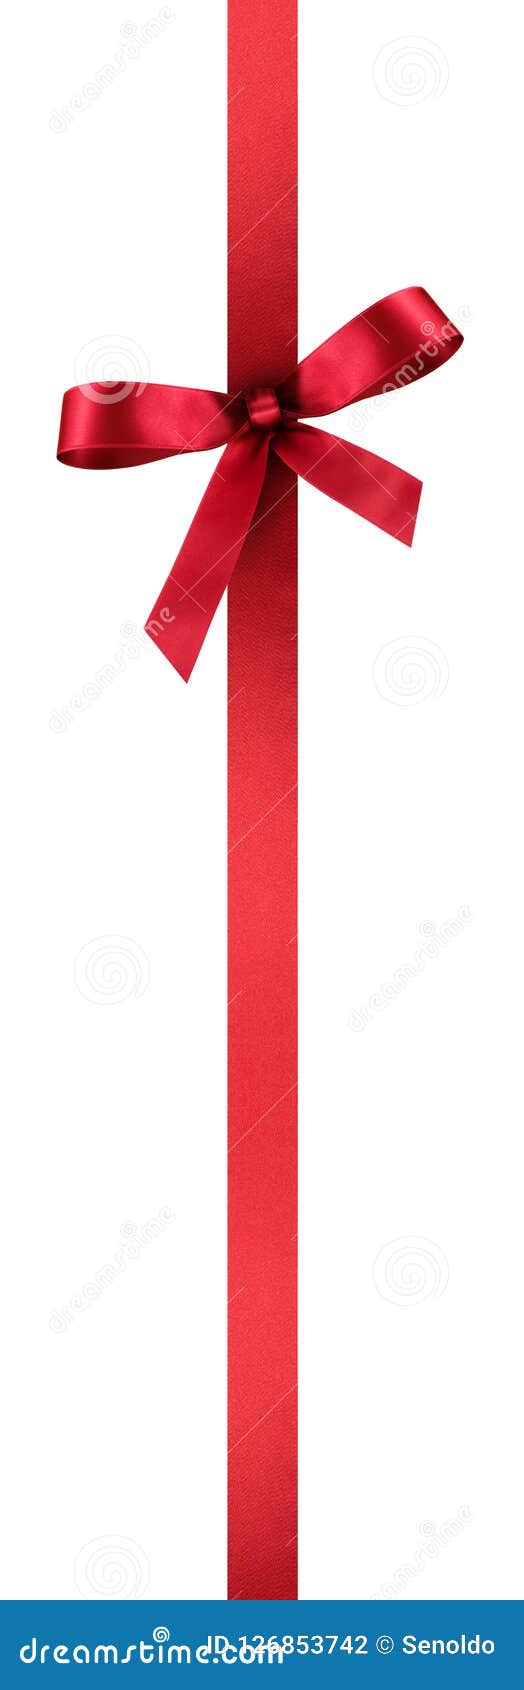 Decorative Red Bow Two Vertical Red Ribbons Stock Vector